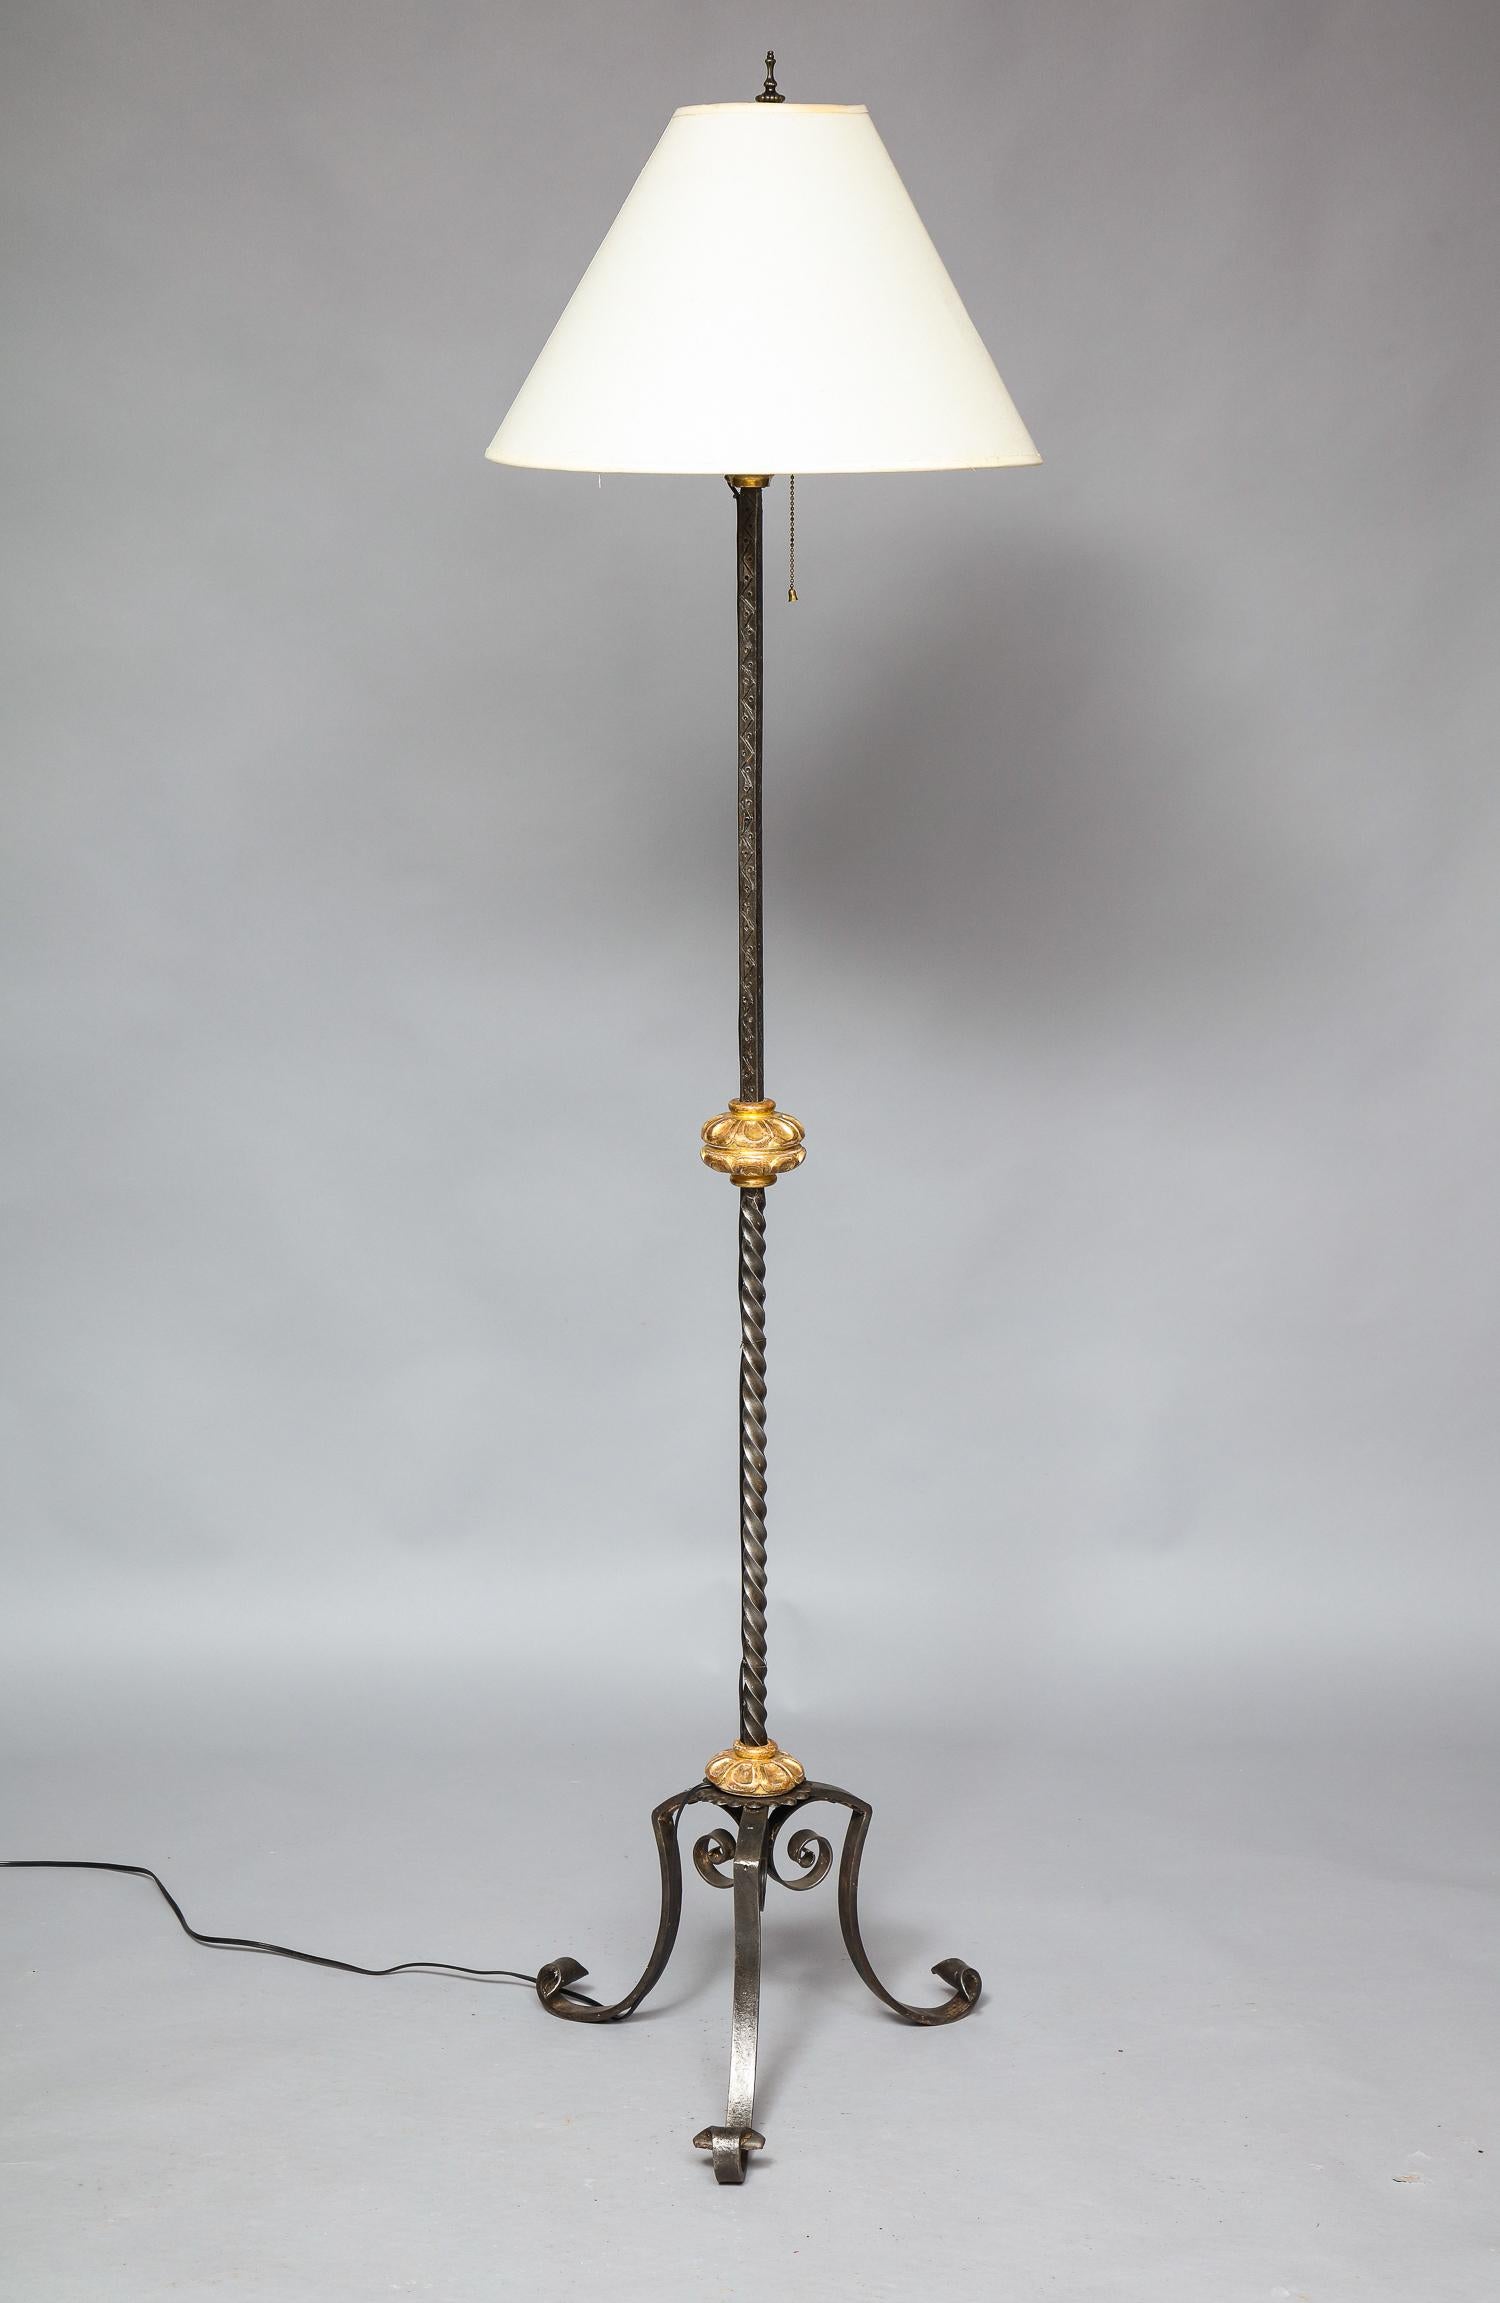 Fine early 20th century Baroque style wrought iron floor lamp with water gilt and carved collars, the barley twist shaft with etched decoration, standing on scrolled wrought iron legs, the whole with pleasing patinated surface and richly burnished